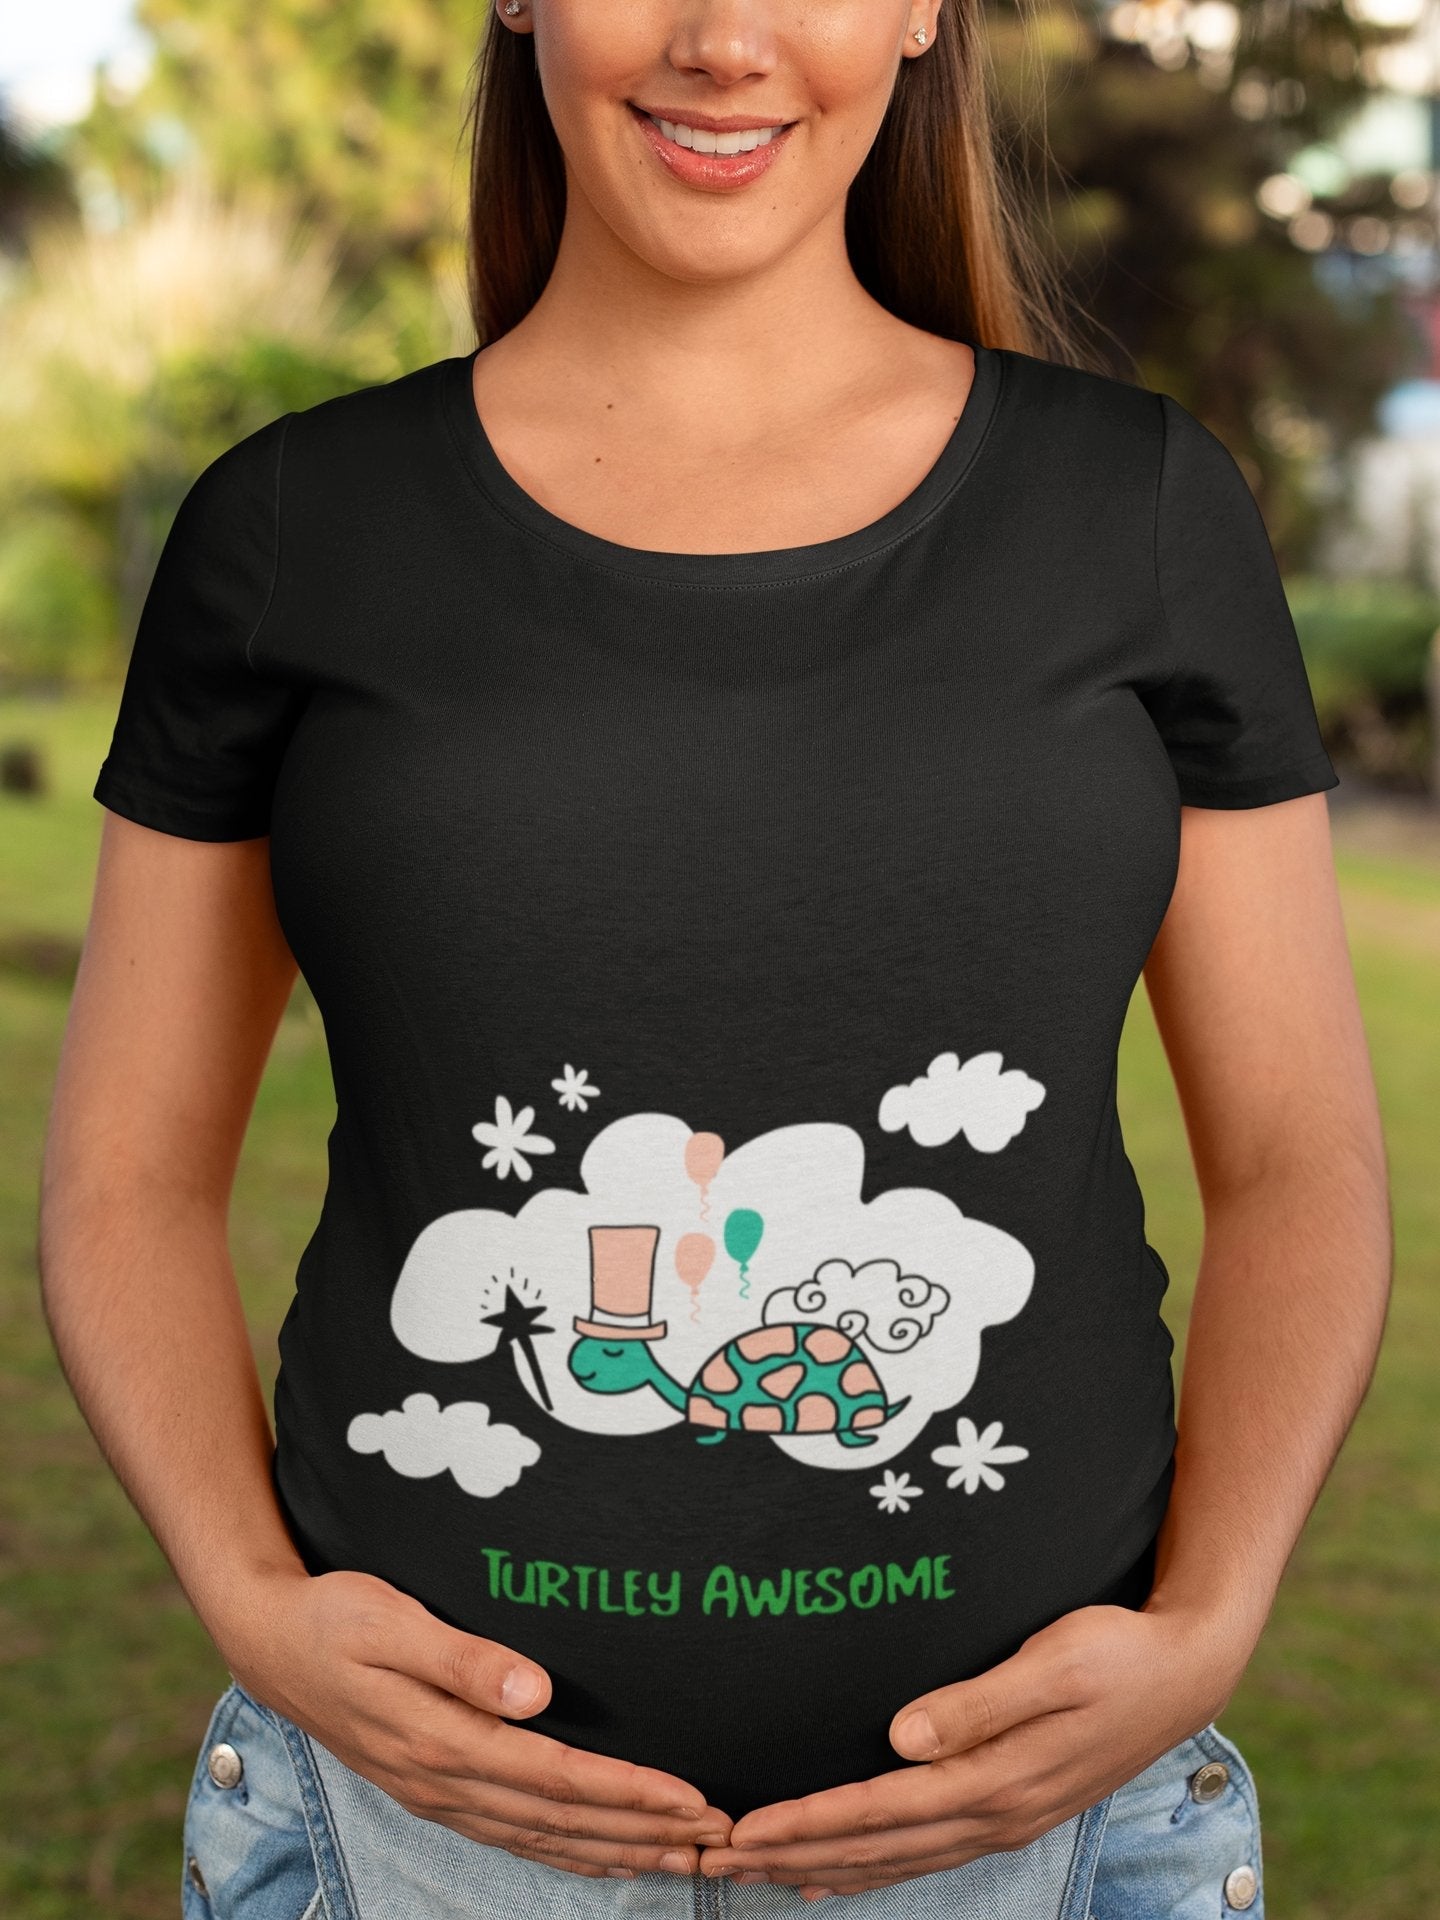 thelegalgang,Turtley Awesome Maternity T shirt,WOMEN.